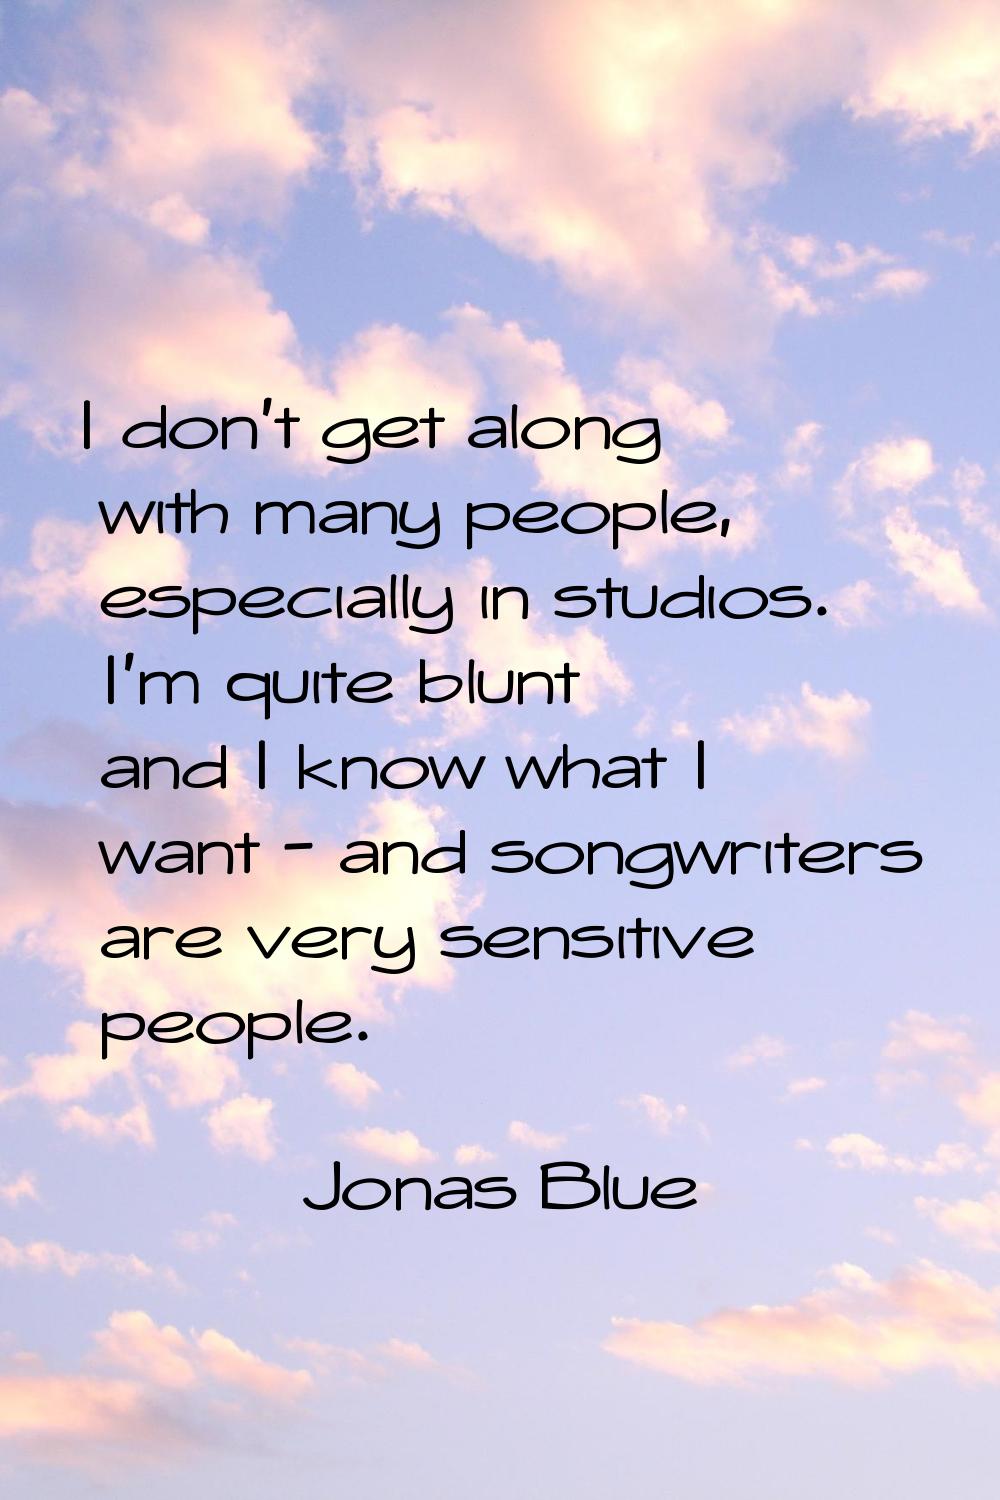 I don't get along with many people, especially in studios. I'm quite blunt and I know what I want -